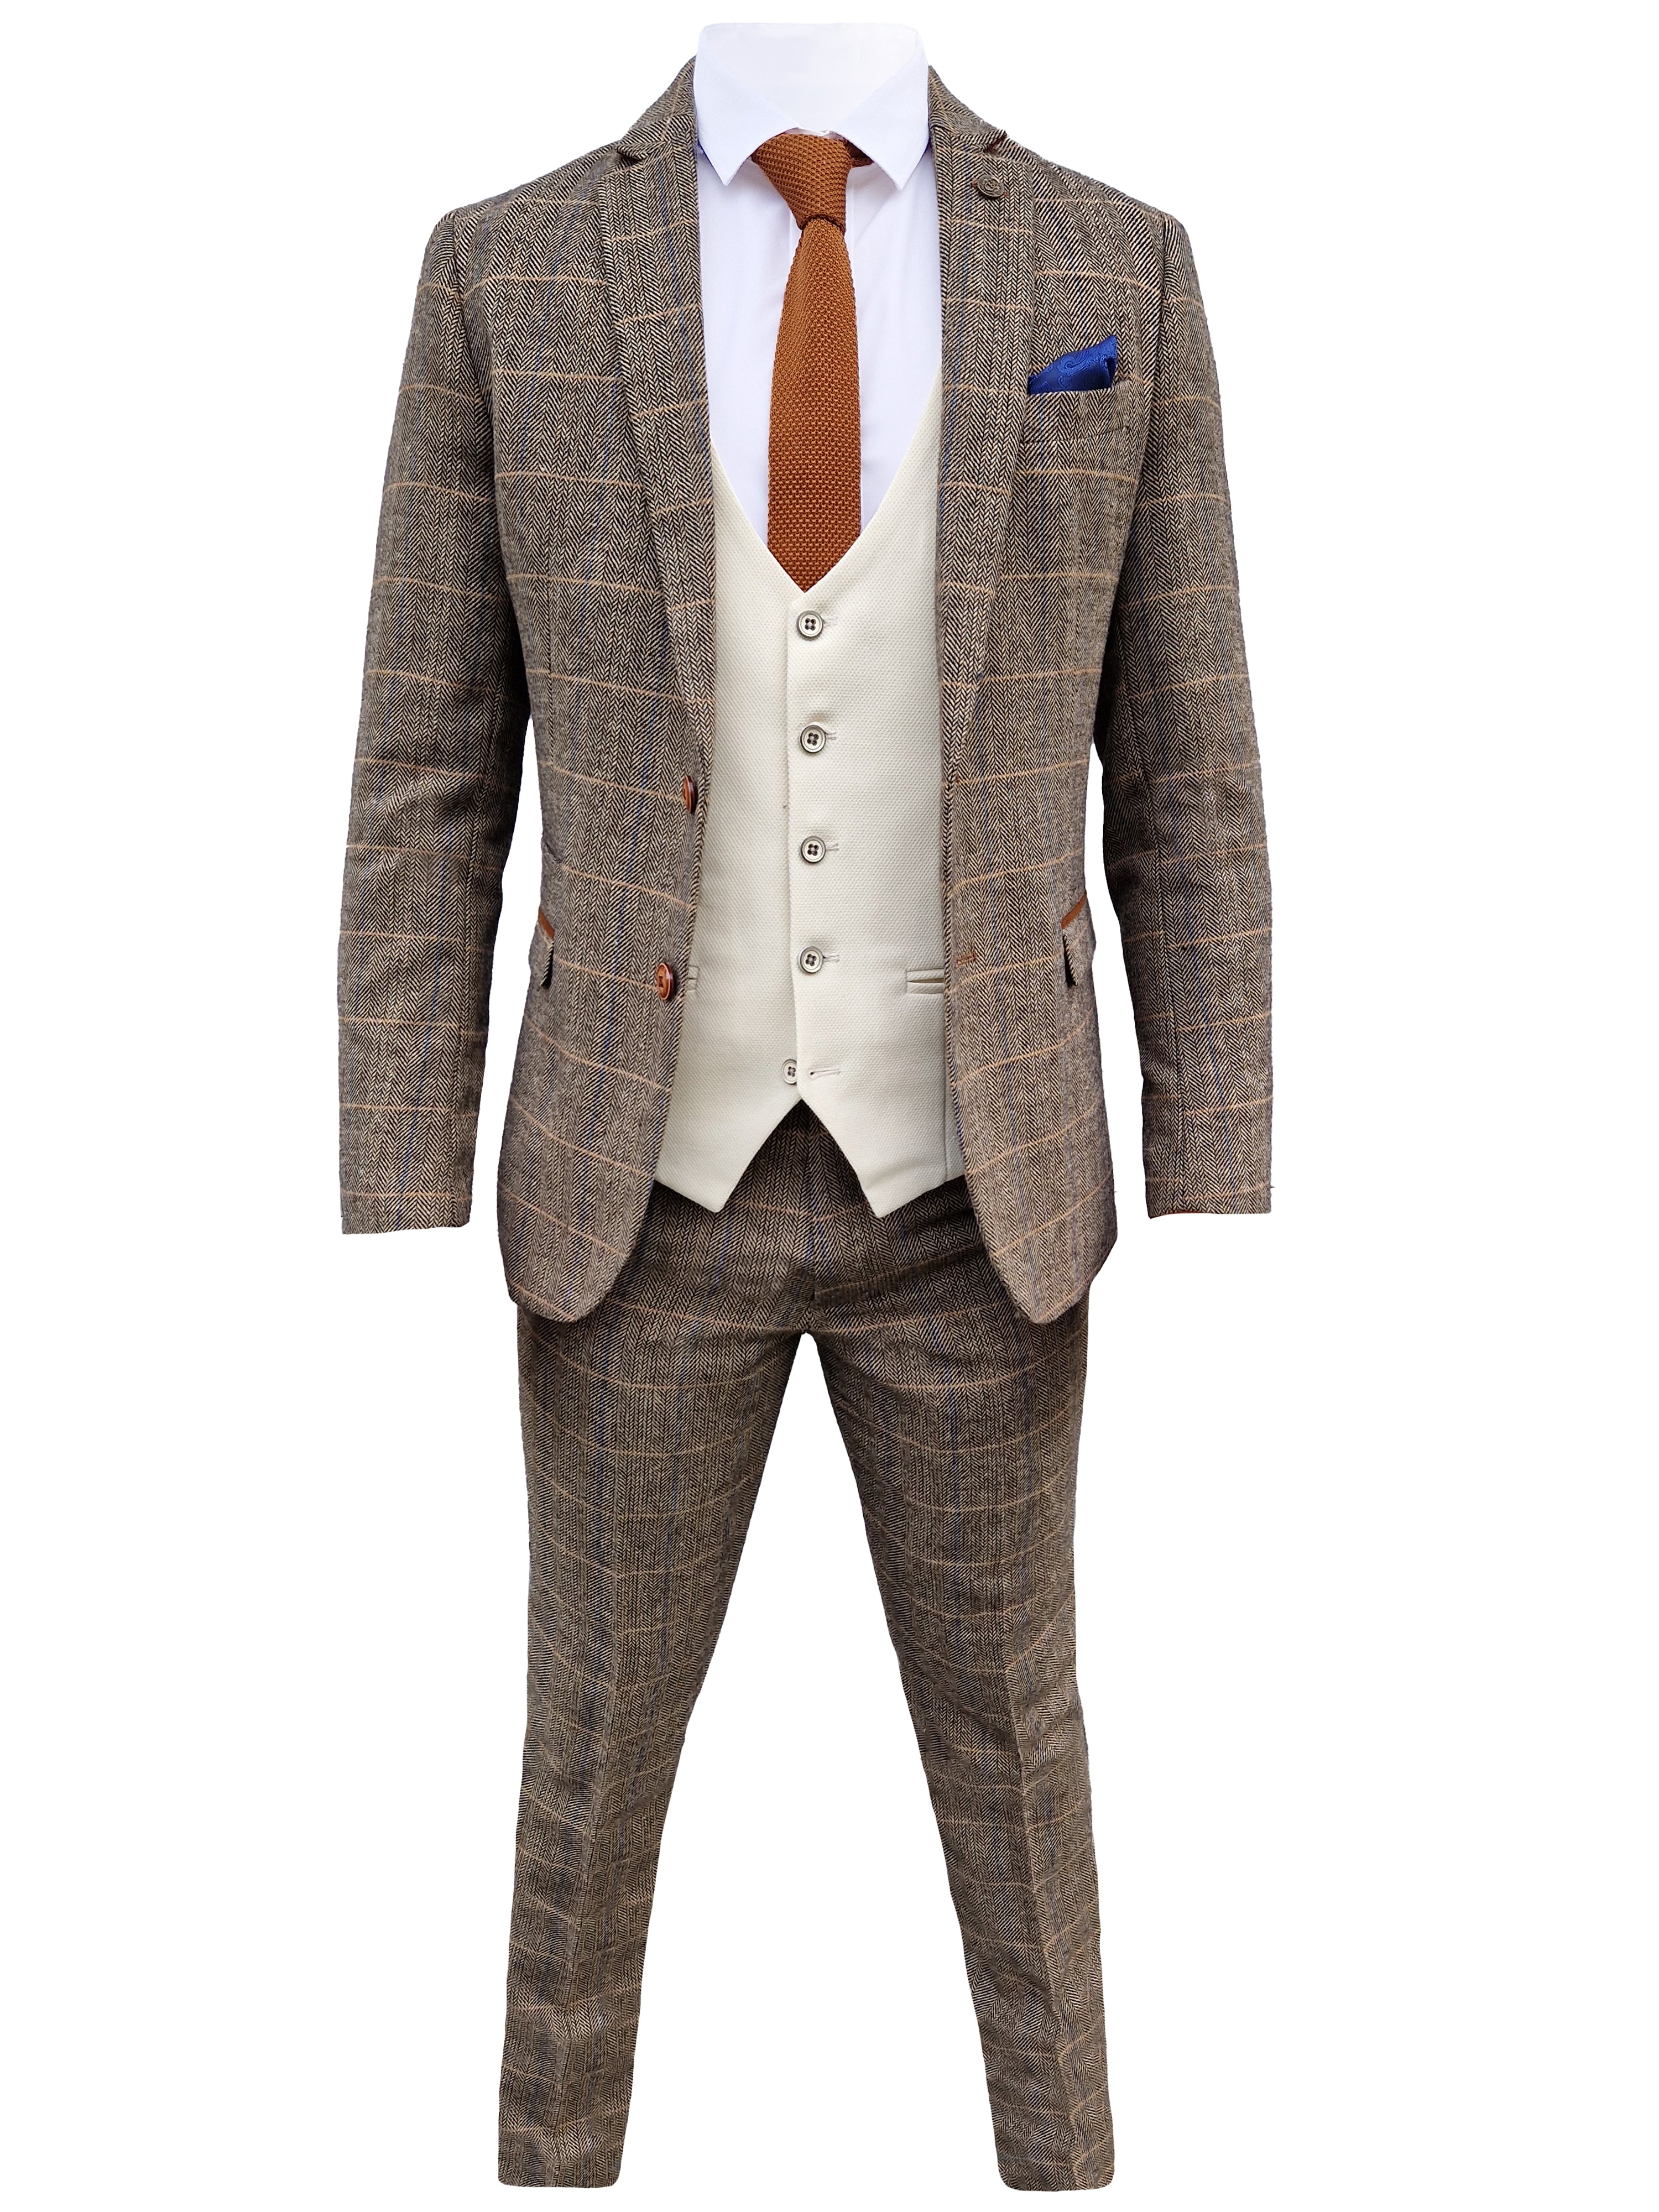 Mix and match - Costume pour hommes 3 pièces Herringbone